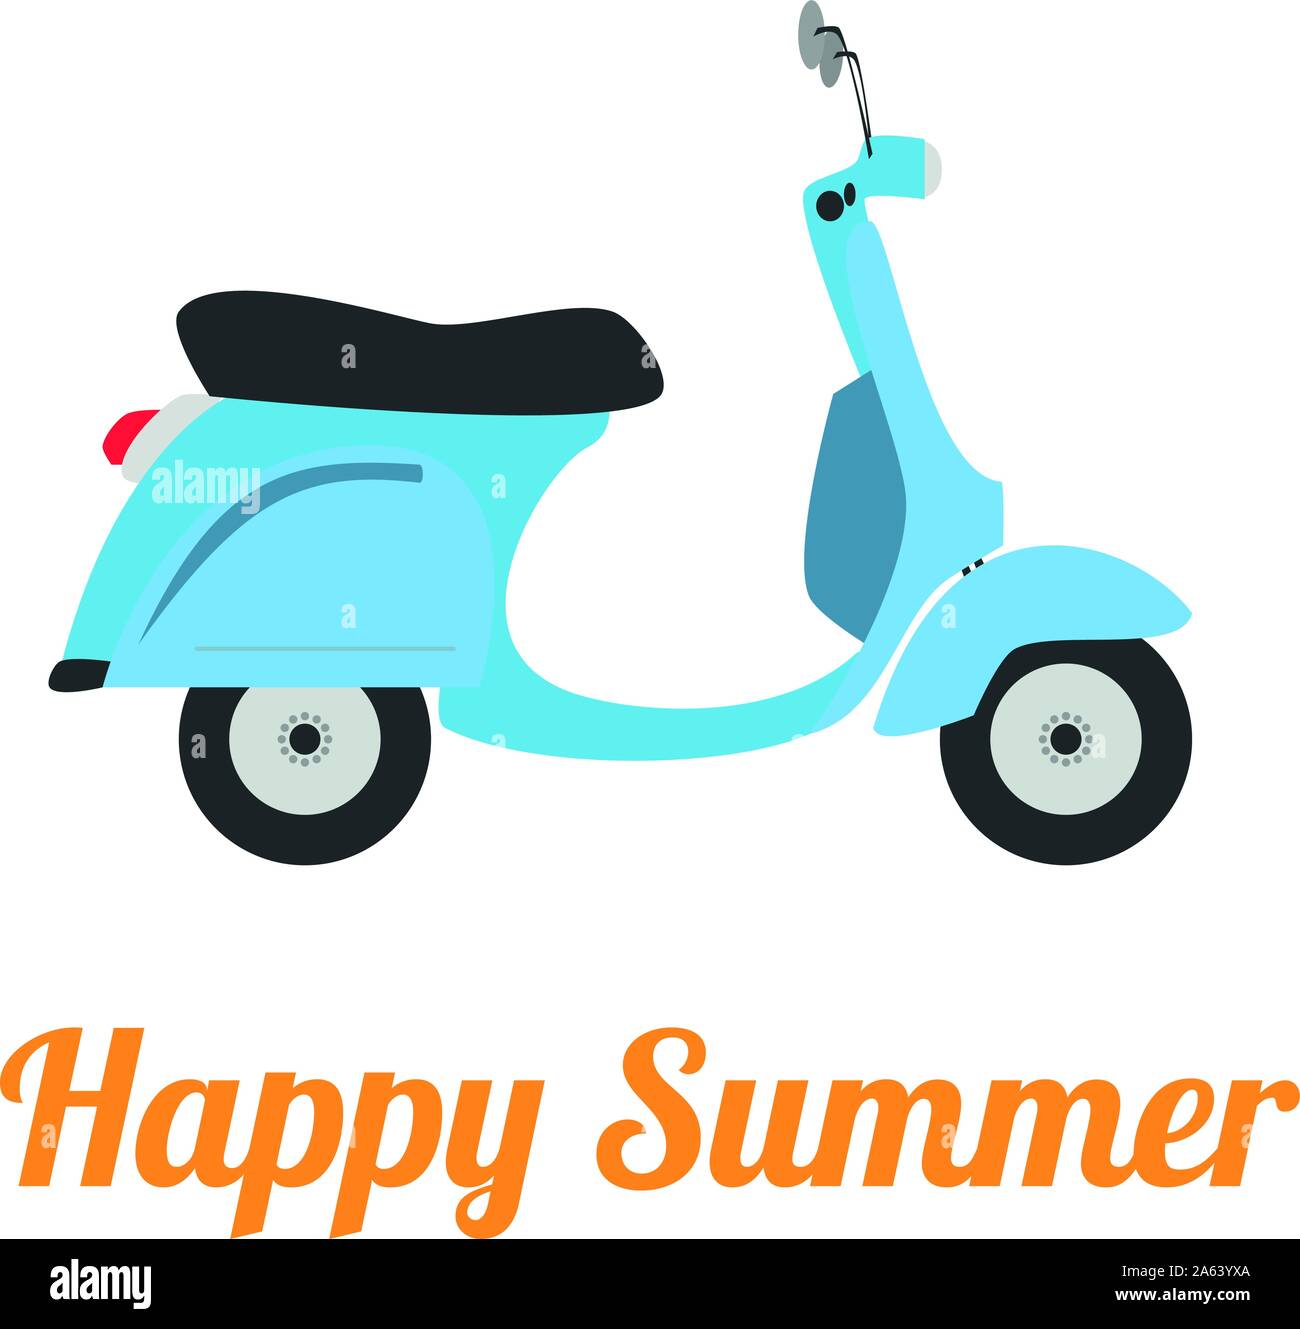 Vector Illustration of a funny blue scooter with text Happy Summer Stock Vector